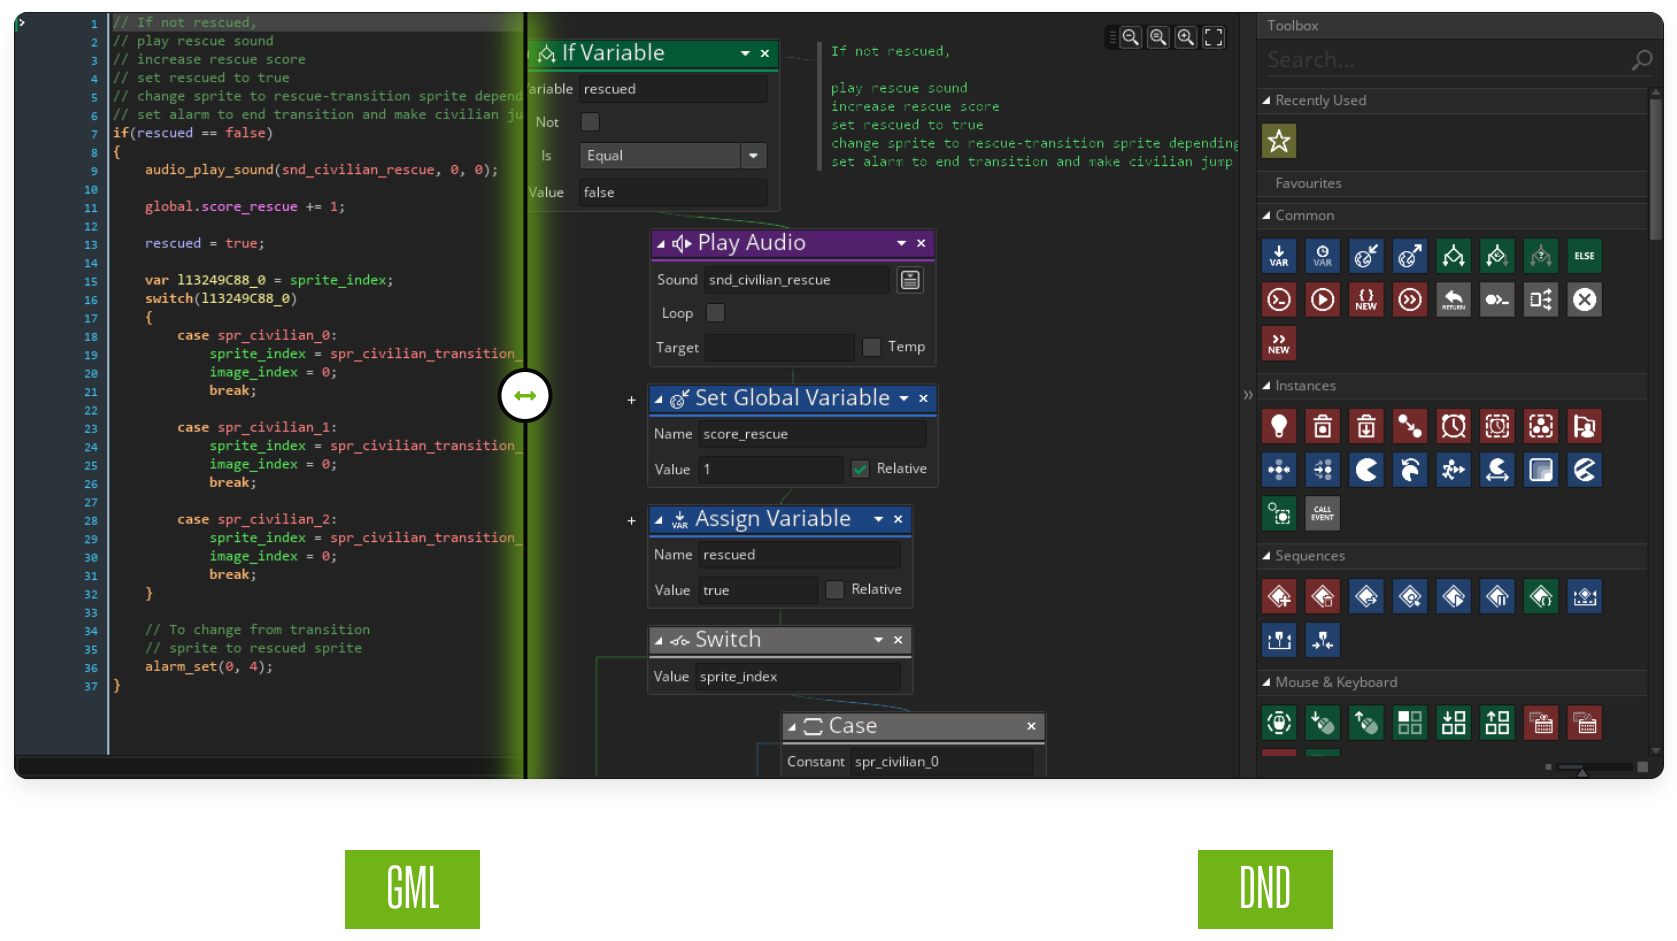 GameMaker's programming language and drag and drop editor.